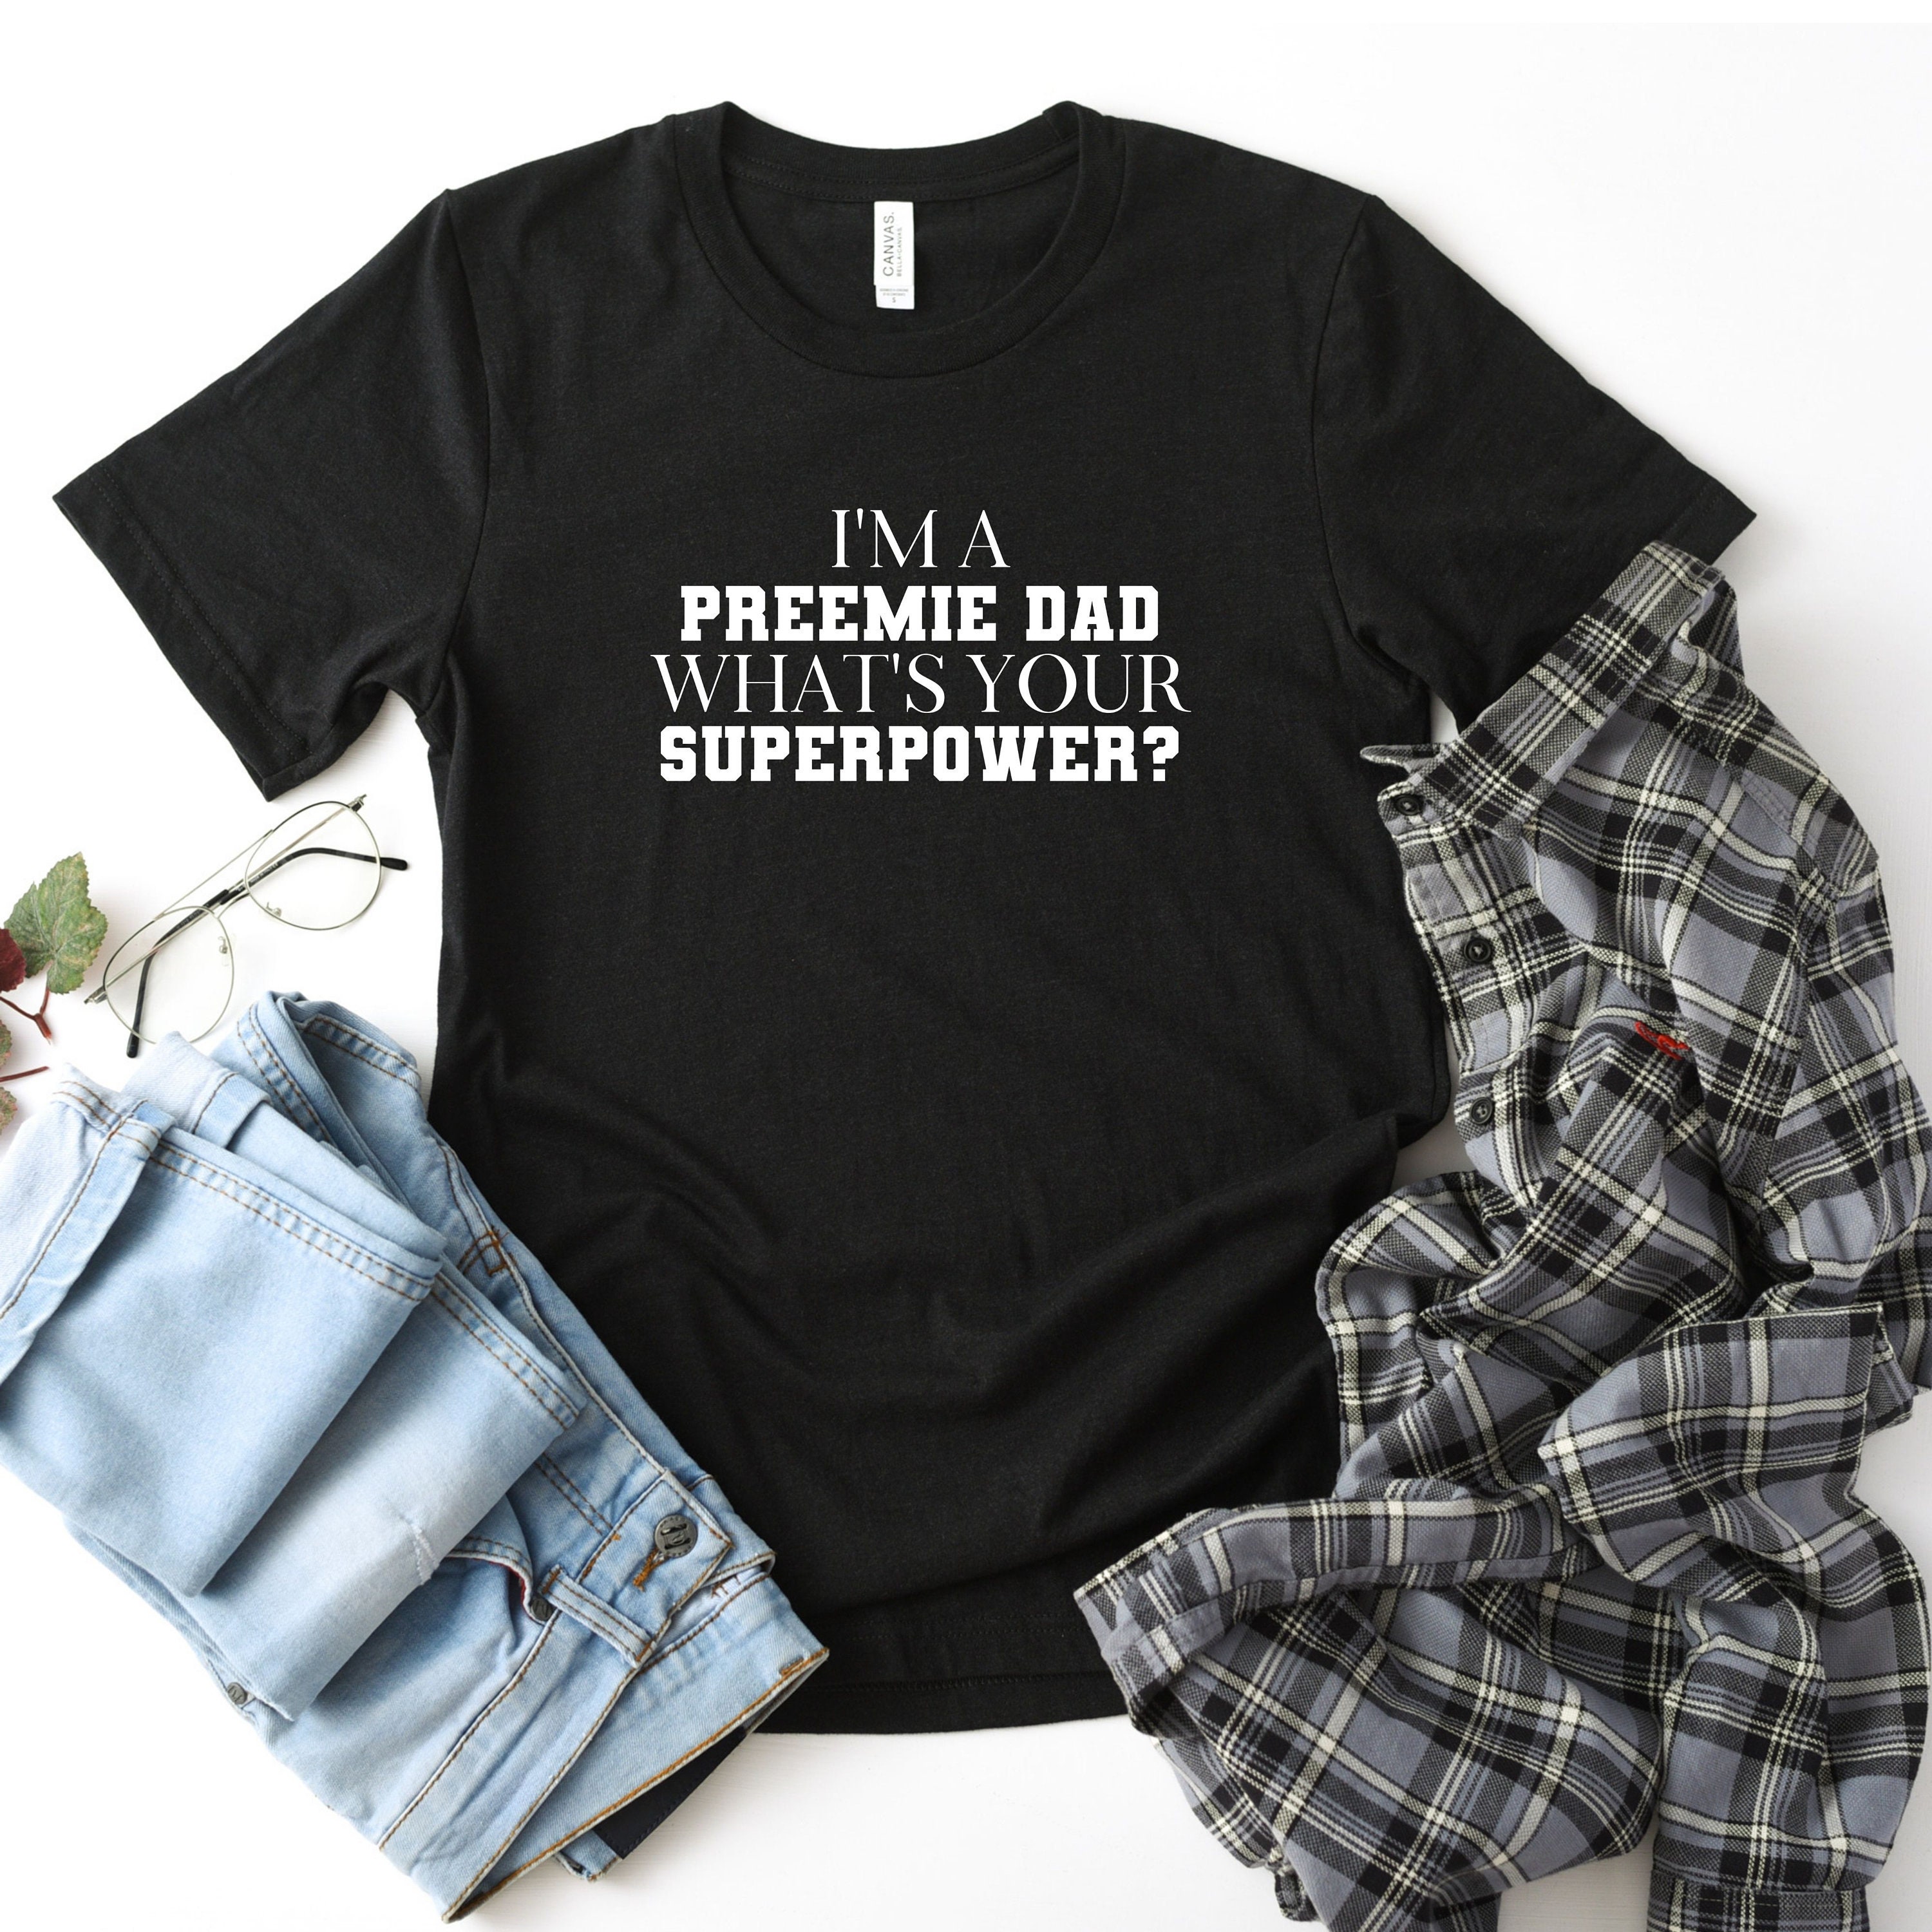 Preemie Dad T Shirt I'm A Preemie Dad What's Your | Etsy